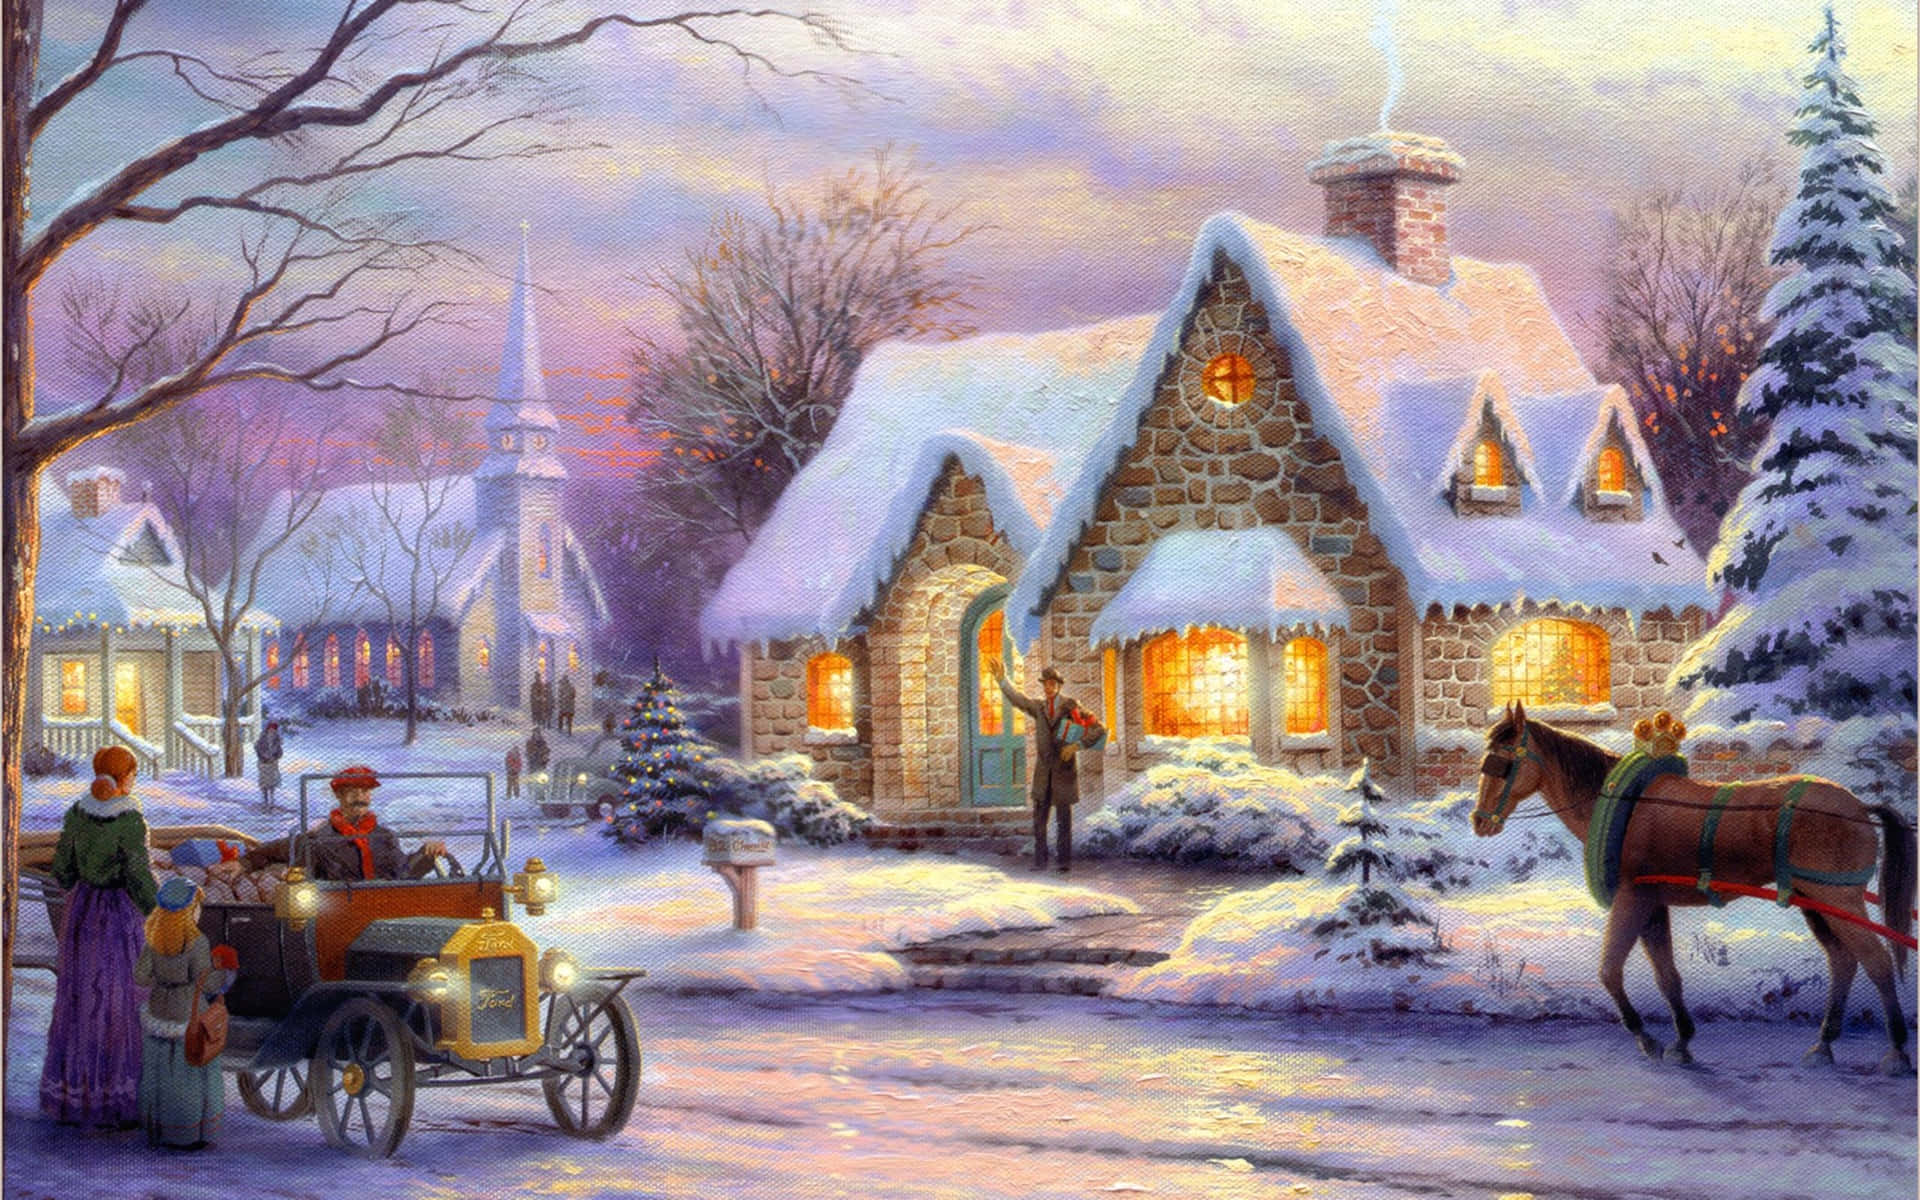 Enchanting Winter Painting of a Snowy Landscape Wallpaper